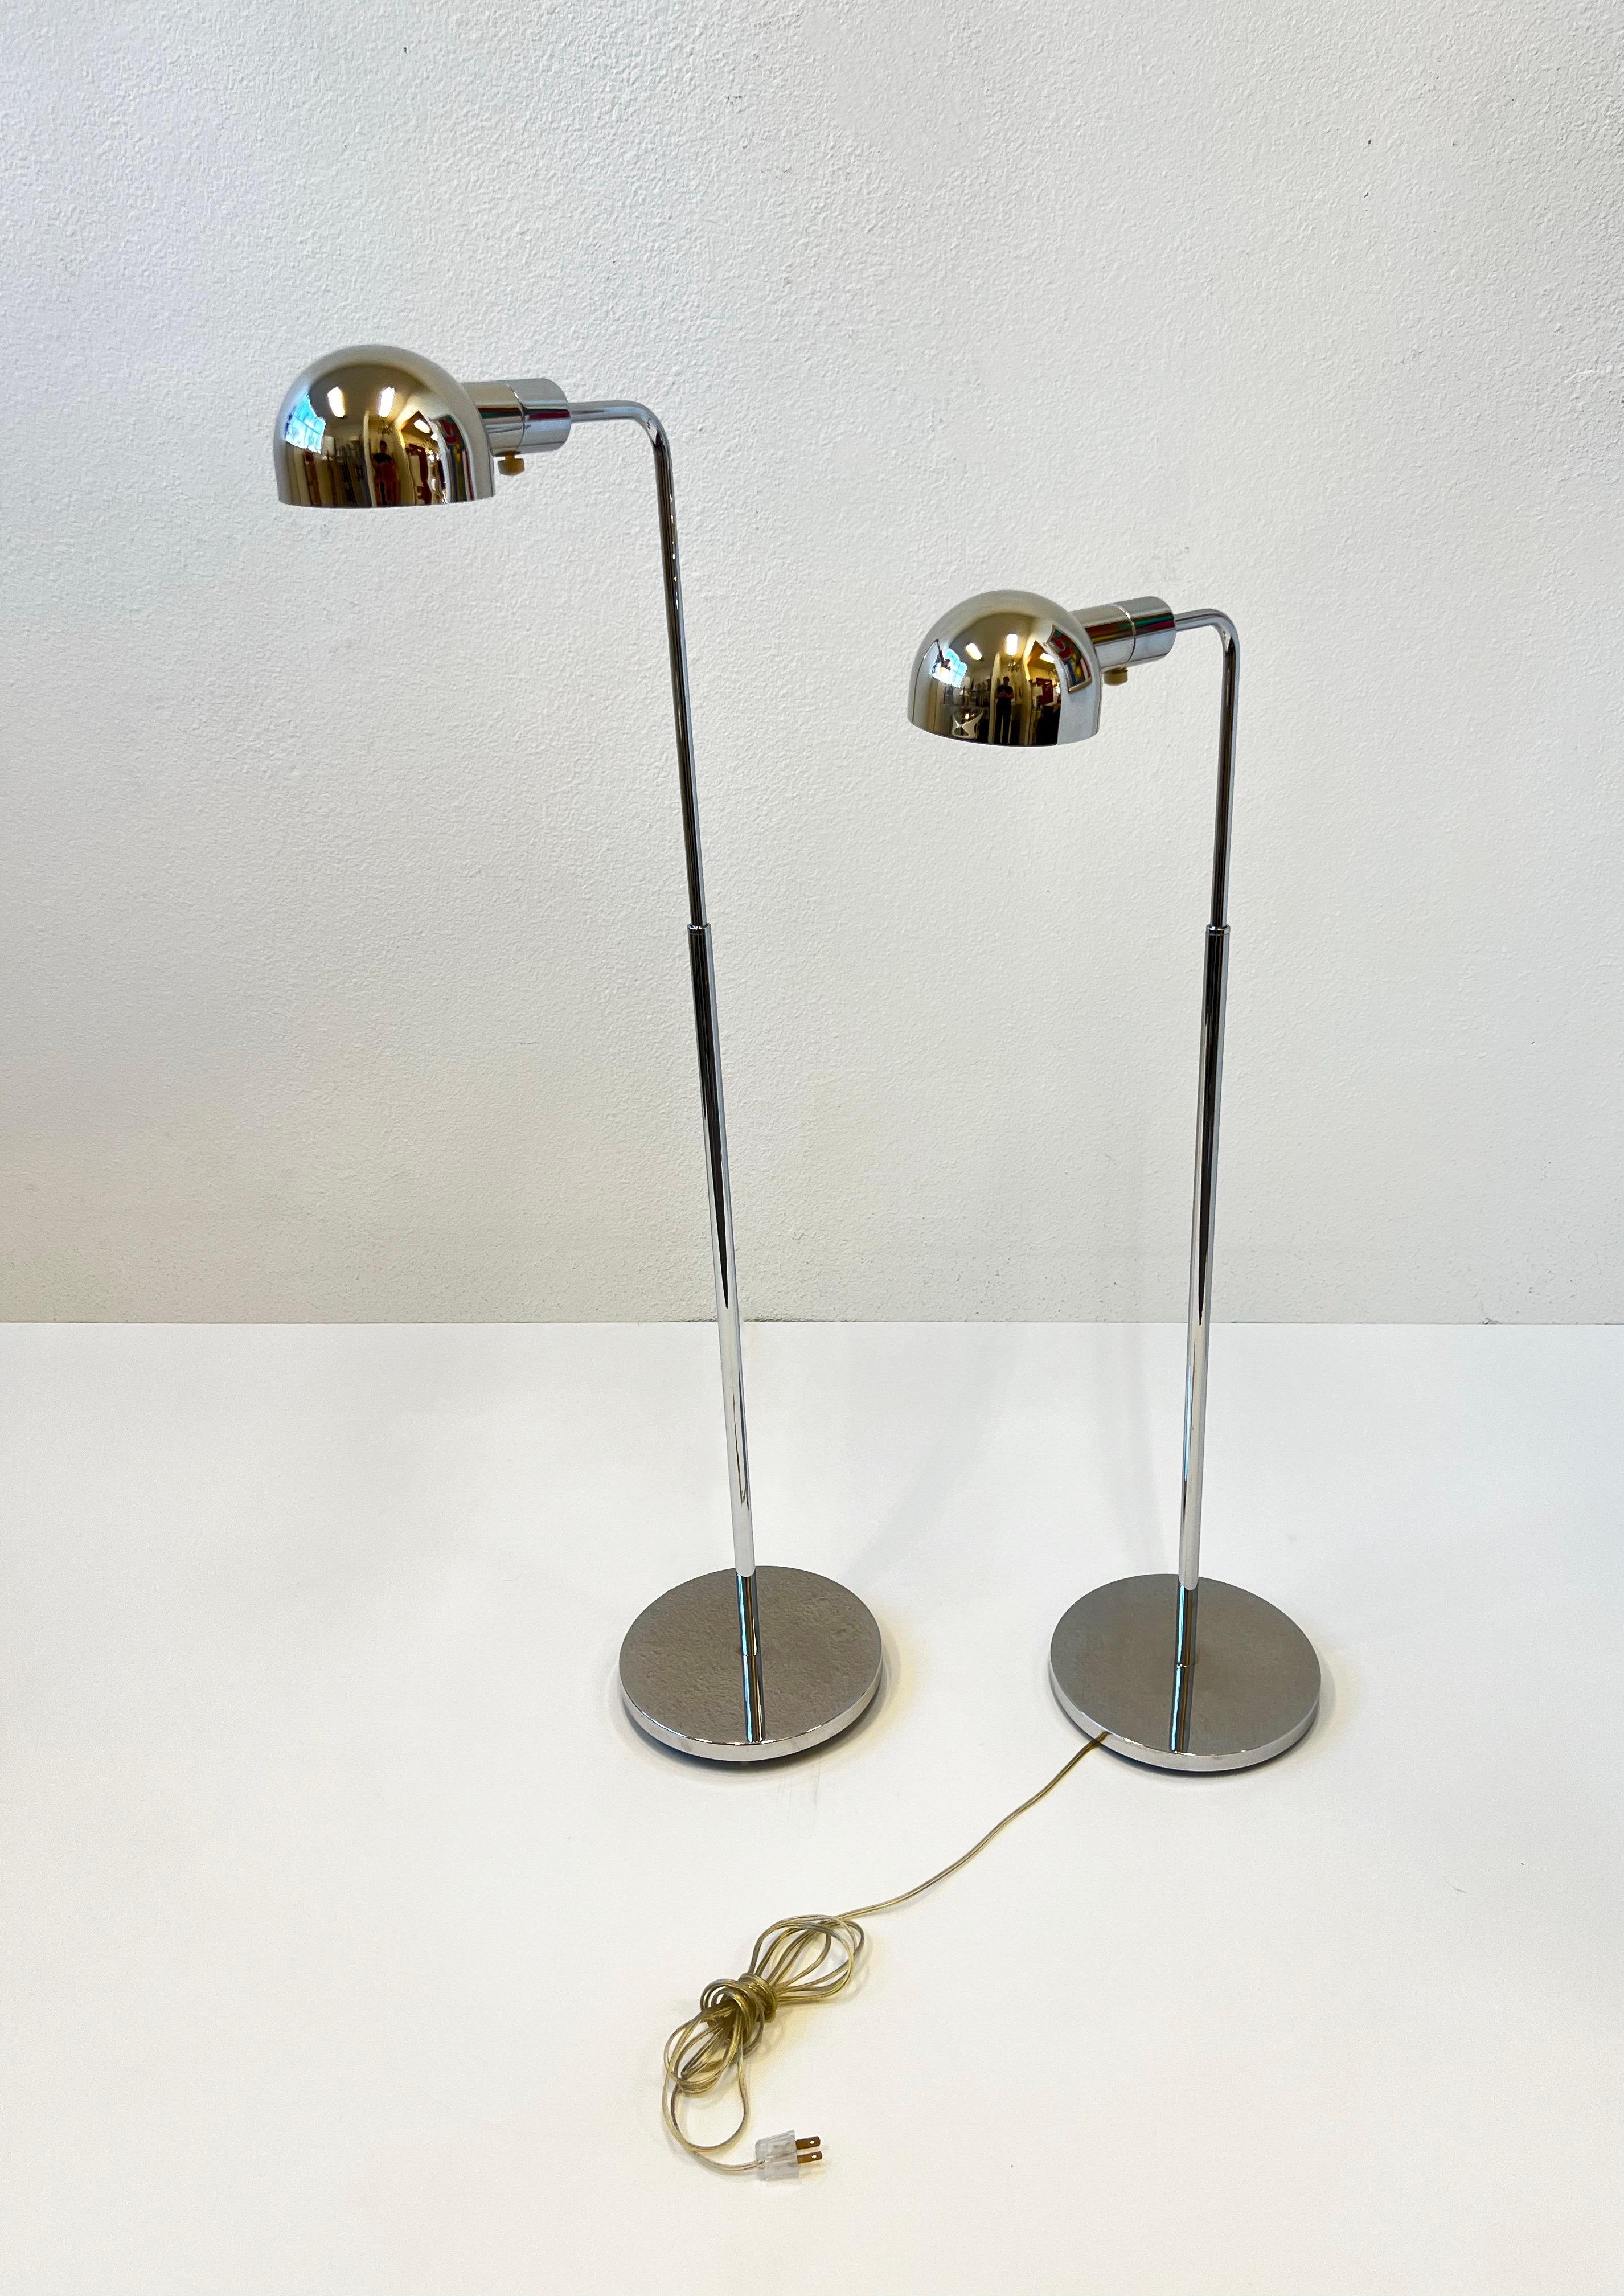 1980’s polish chrome adjustable floor lamps by Casella Lighting. 
In good original vintage condition, shows minor wear consistent with age. The lamps are dimmable and take one 75w max Edison light bulb. 
49.5” High when all the way up, 33.5” High